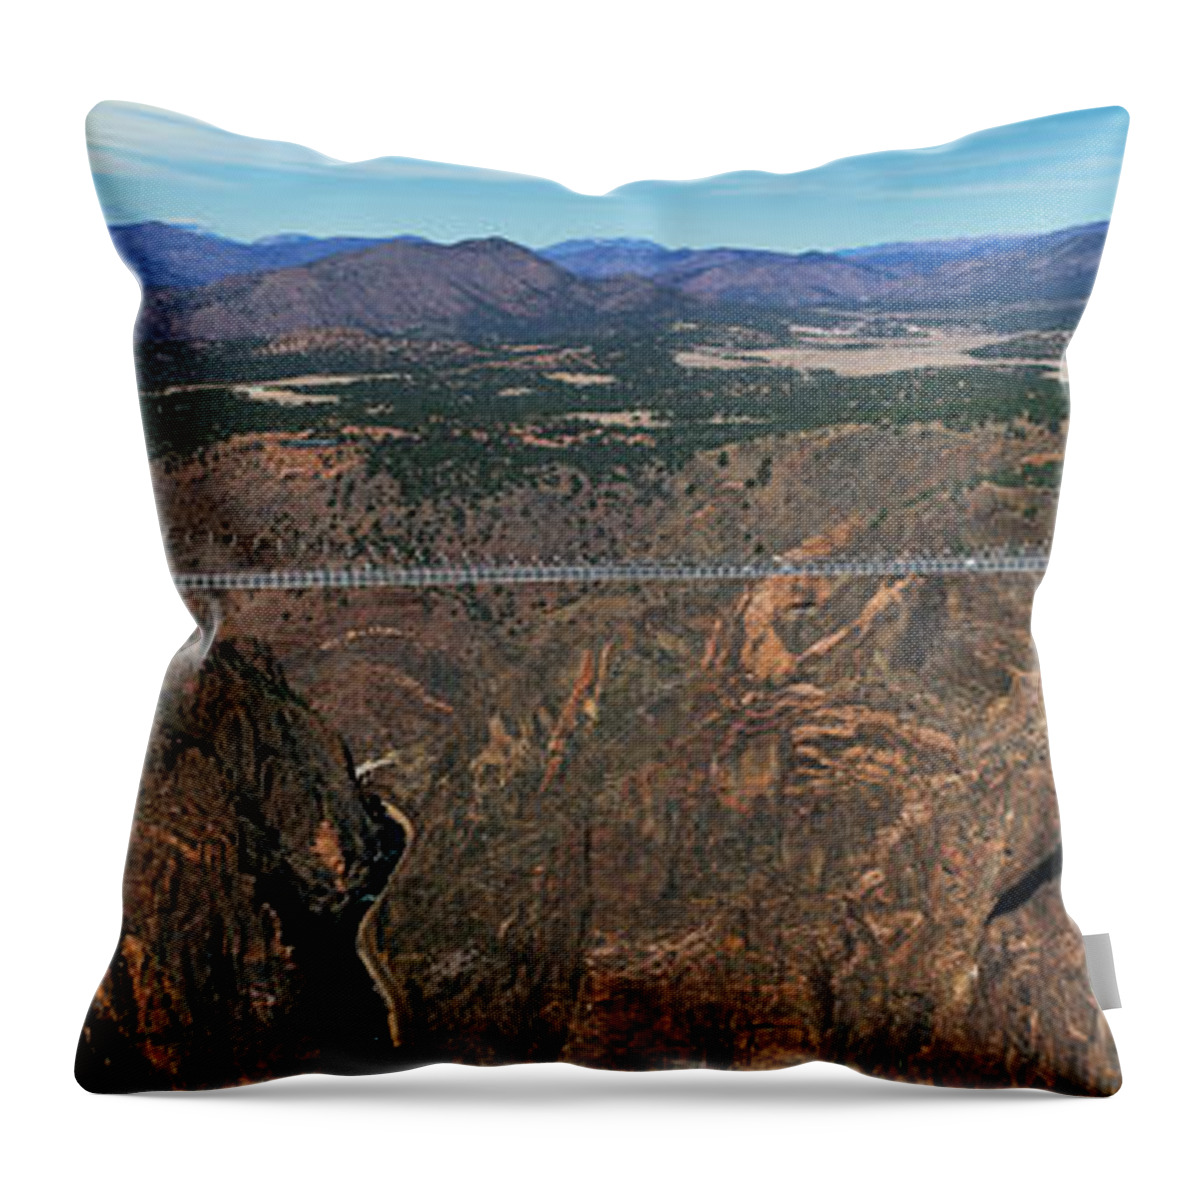 Photography Throw Pillow featuring the photograph Royal Gorge Bridge Arkansas River Co by Panoramic Images